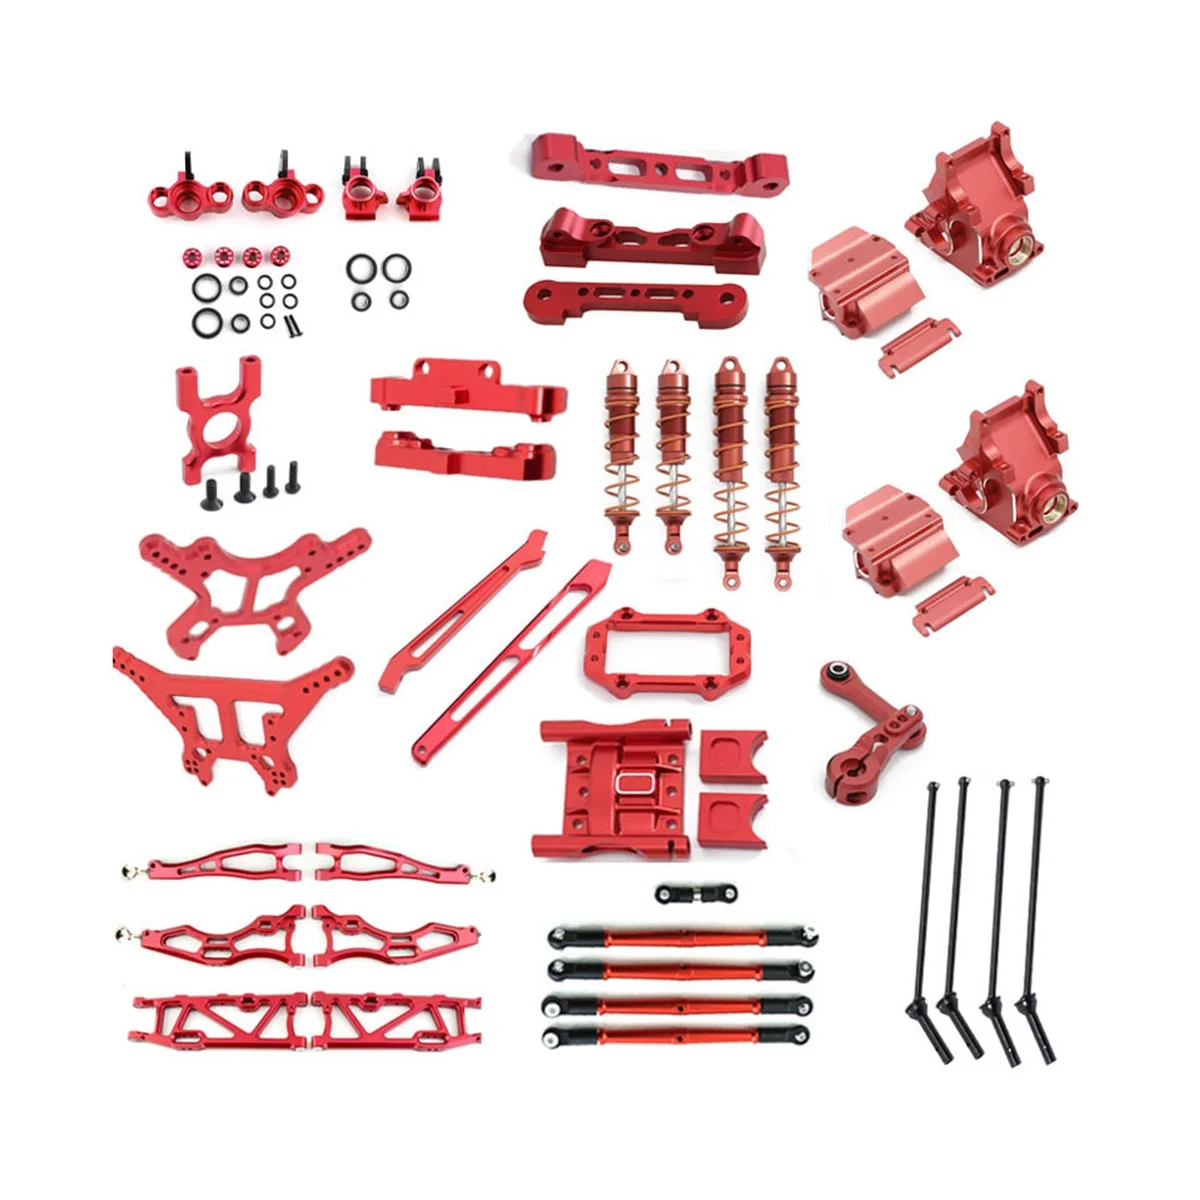 

Metal Upgrade Parts Kit Suspension Arm Shock Absorber Drive Shaft for Arrma 1/8 Kraton Outcast 6S Accessories,Red